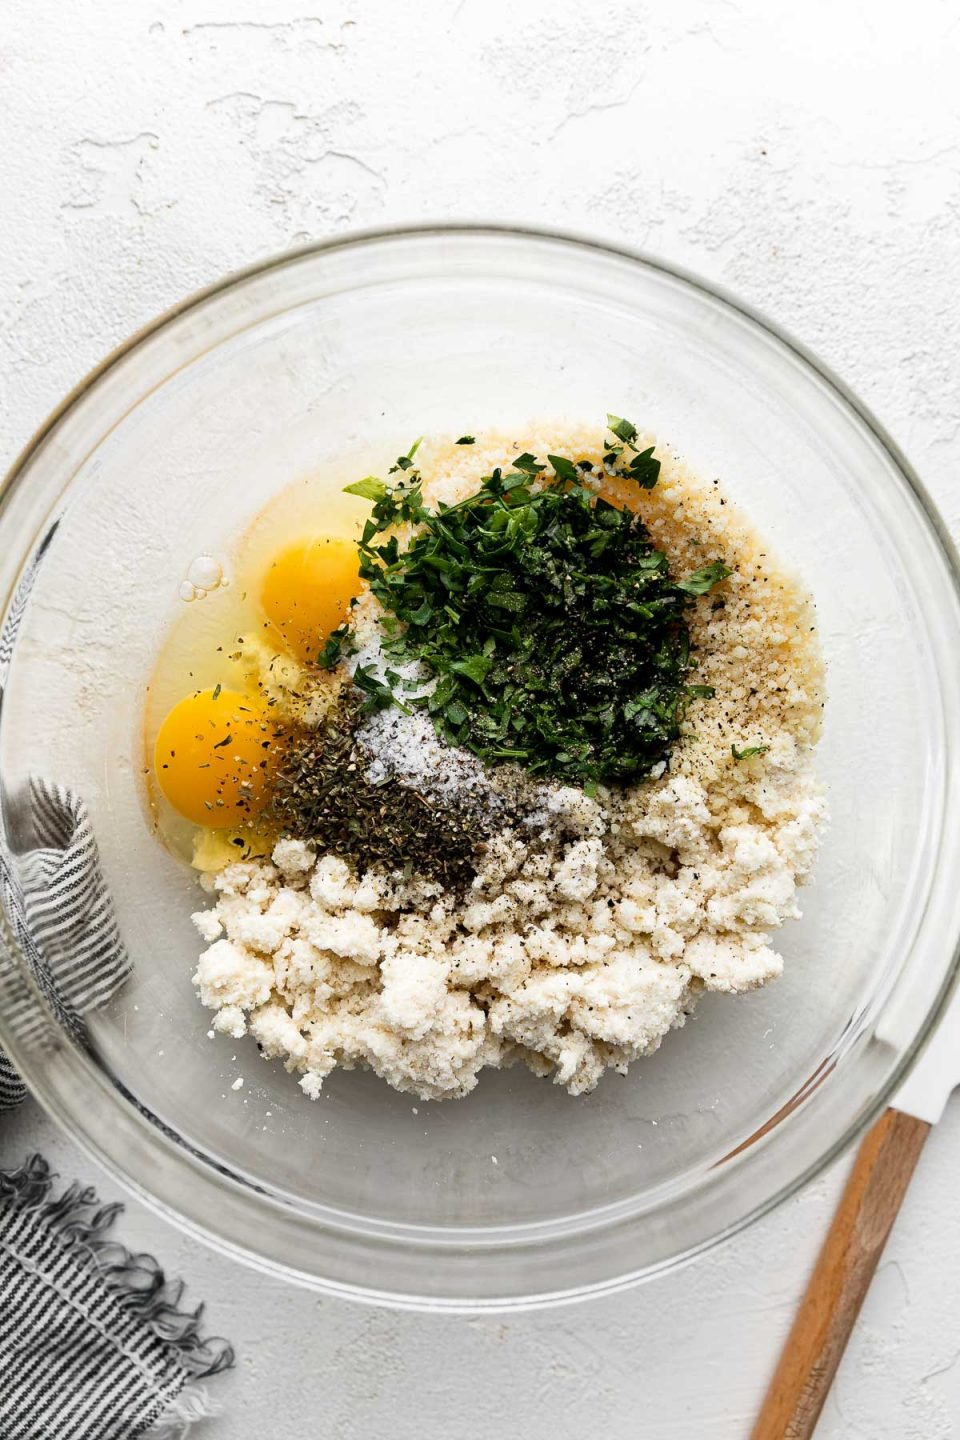 A large glass mixing bowl filled with ricotta soaked panko breadcrumbs, eggs, grated parmesan cheese, softened onion and garlic, freshly chopped parsley and basil, and Italian seasoning that will become a seasoned breadcrumb mixture for Italian ricotta meatballs. A wooden spatula and a white and blue striped linen napkin rest alongside the mixing bowl and the bowl sits atop a creamy white cement surface.